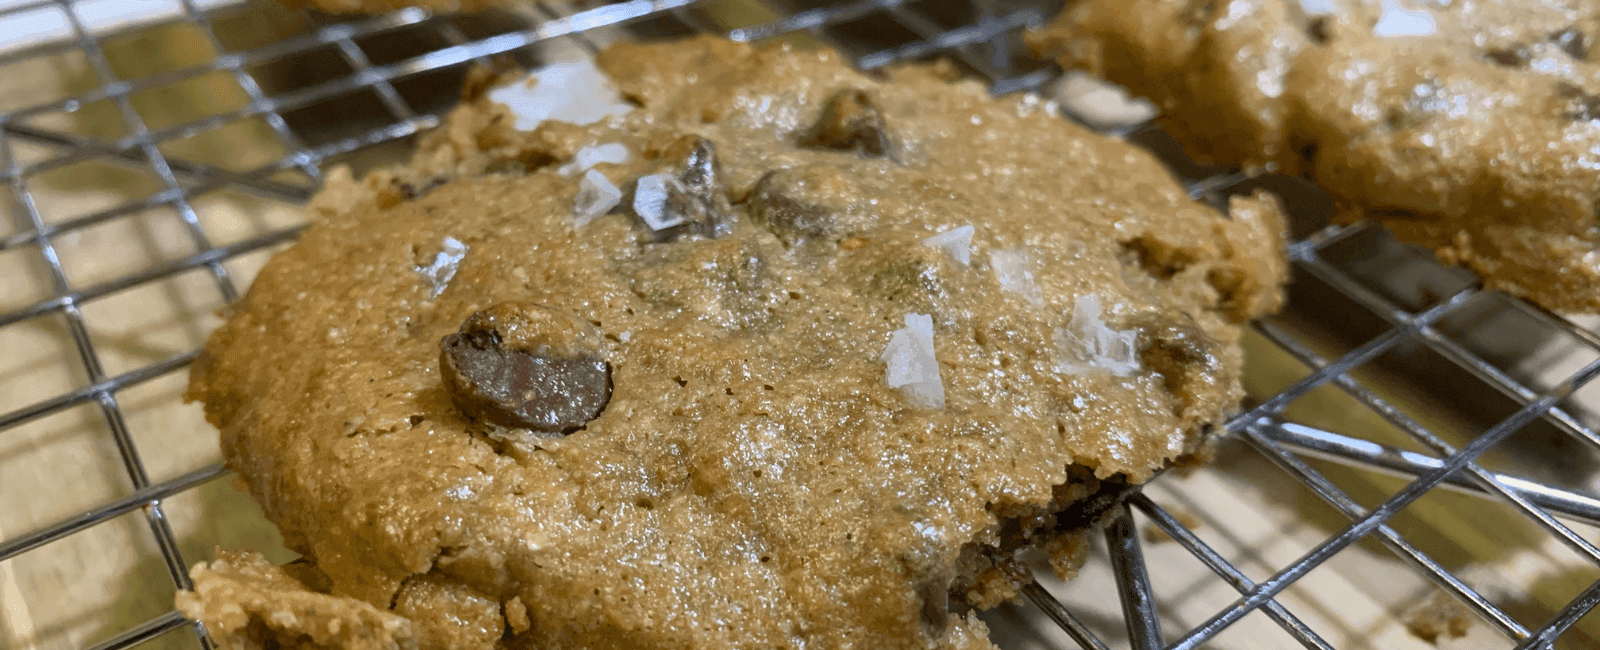 How to Make Shroomy Nut Butter Chocolate Chunk Cookies from 'Cooking with Mushrooms'